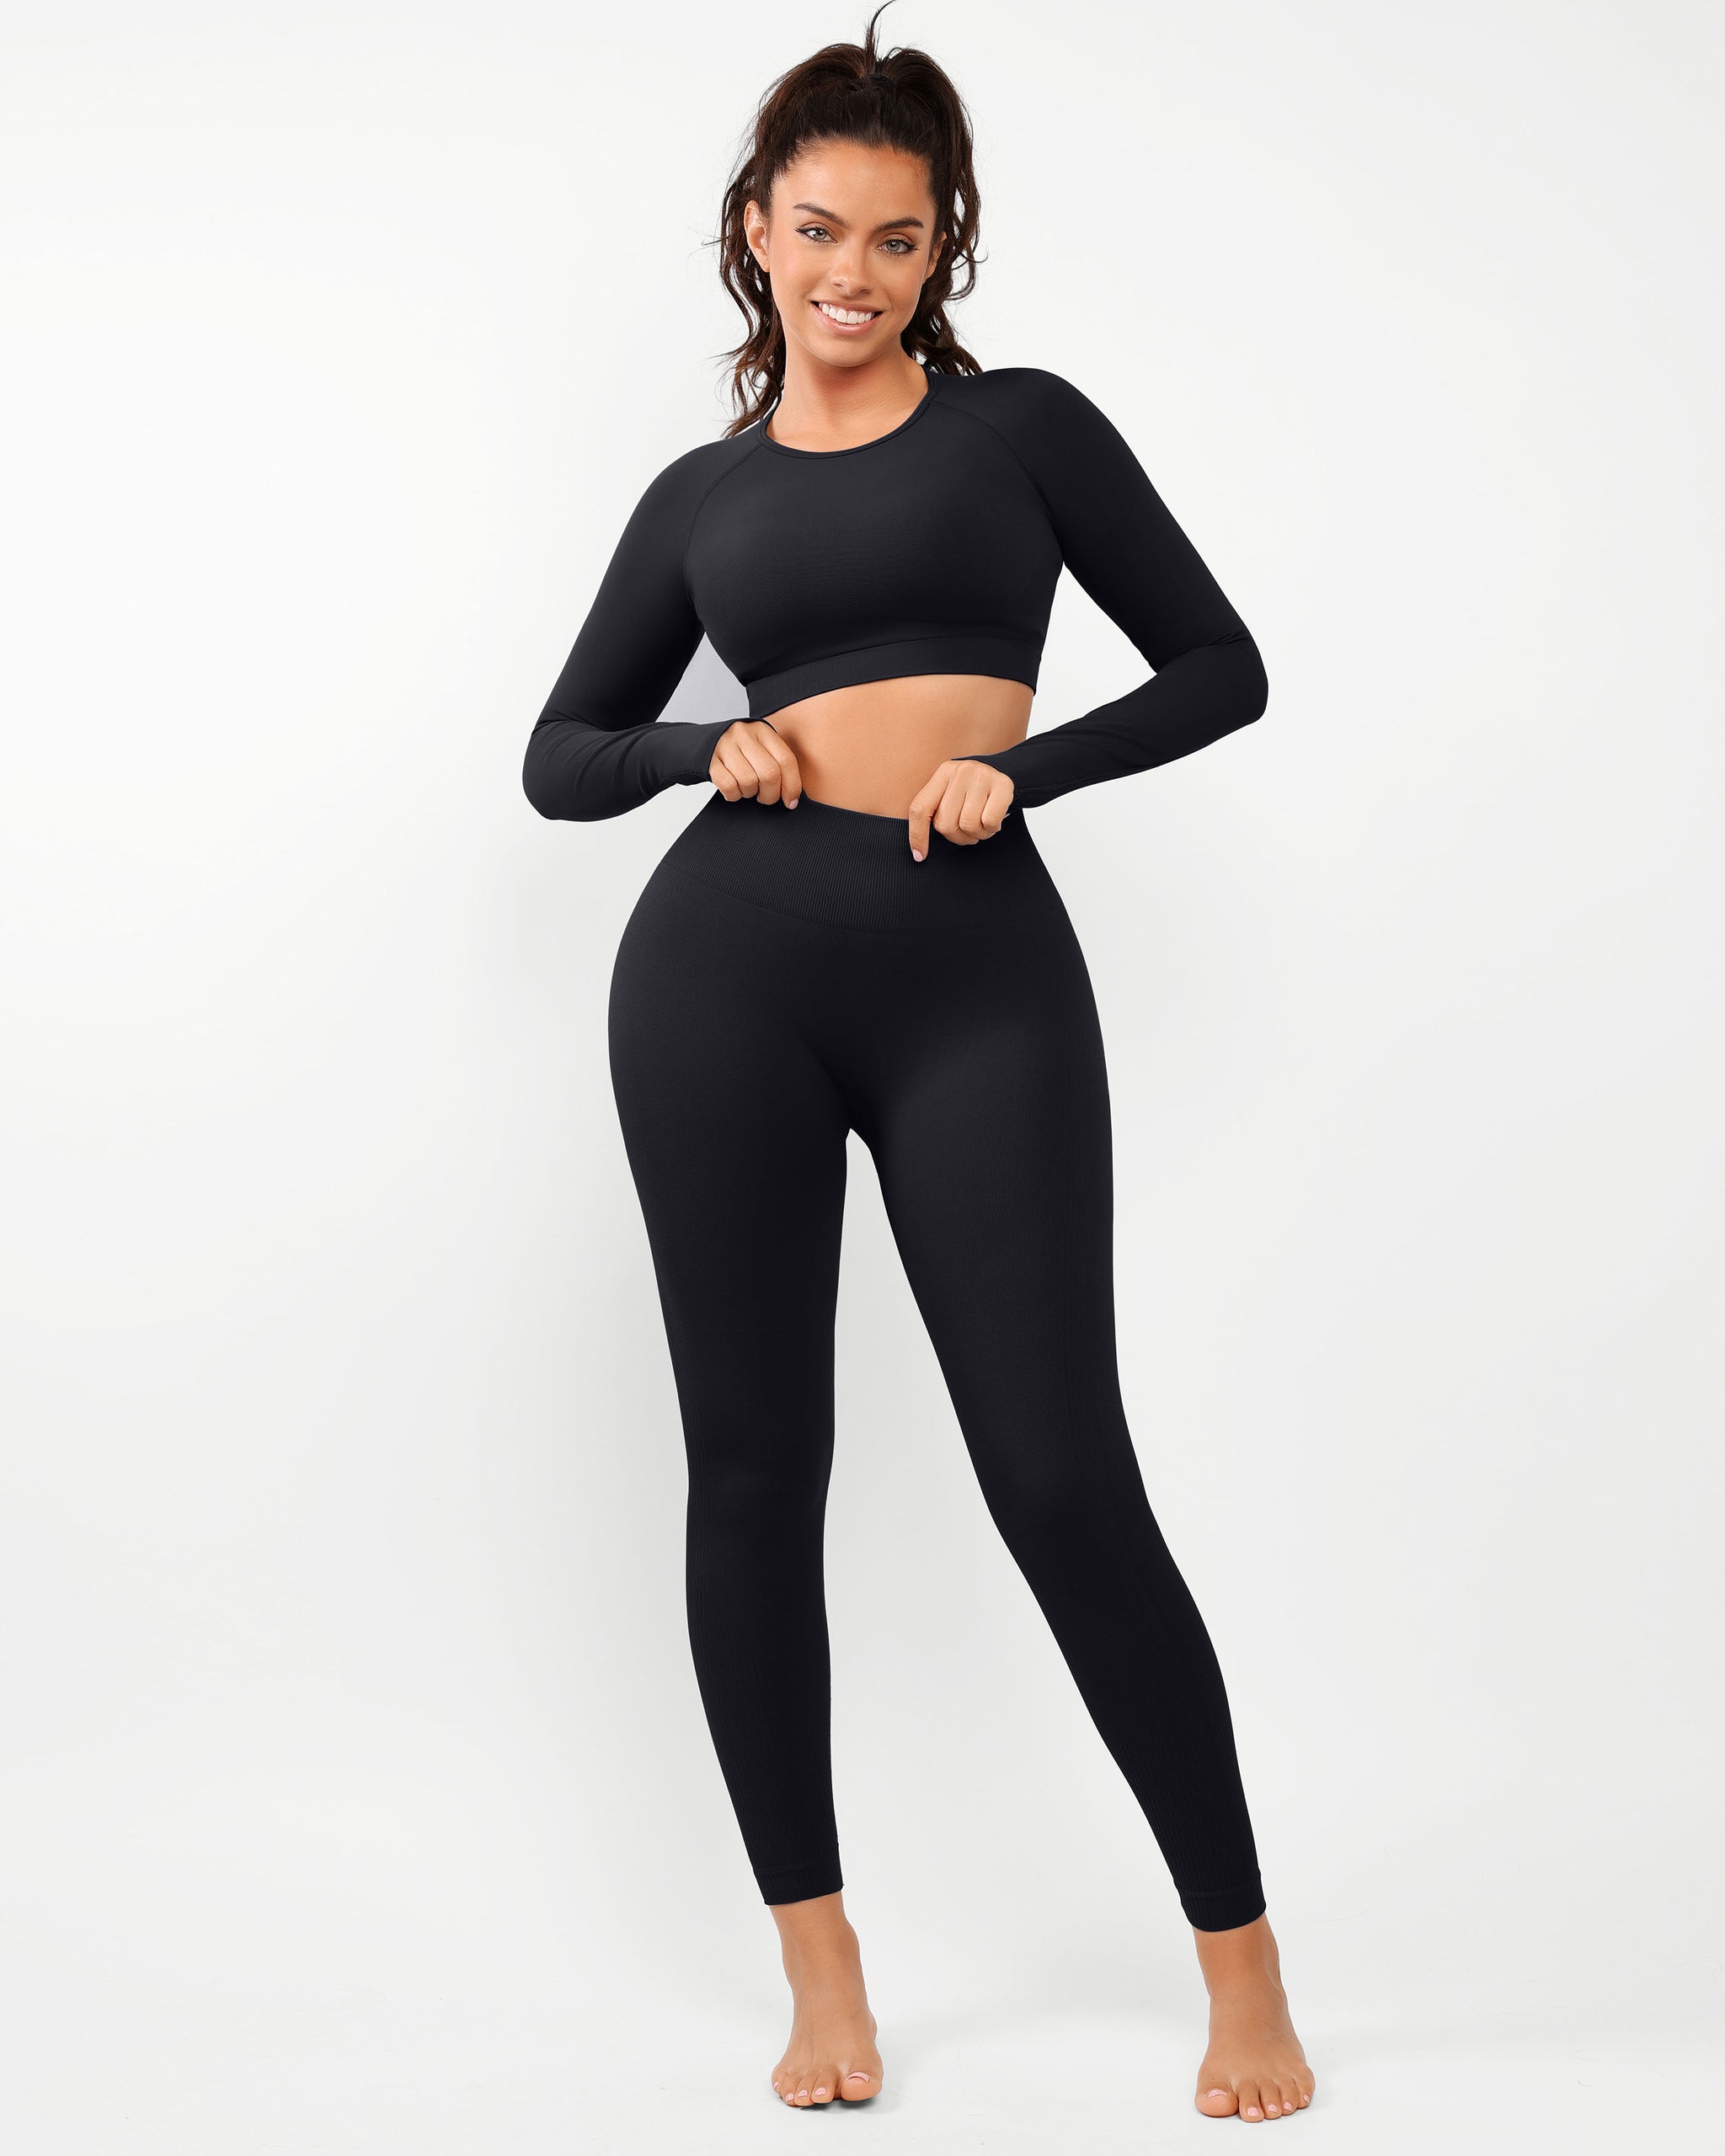  Cosmolle Workout Sets Long Sleeve Outfits for Women